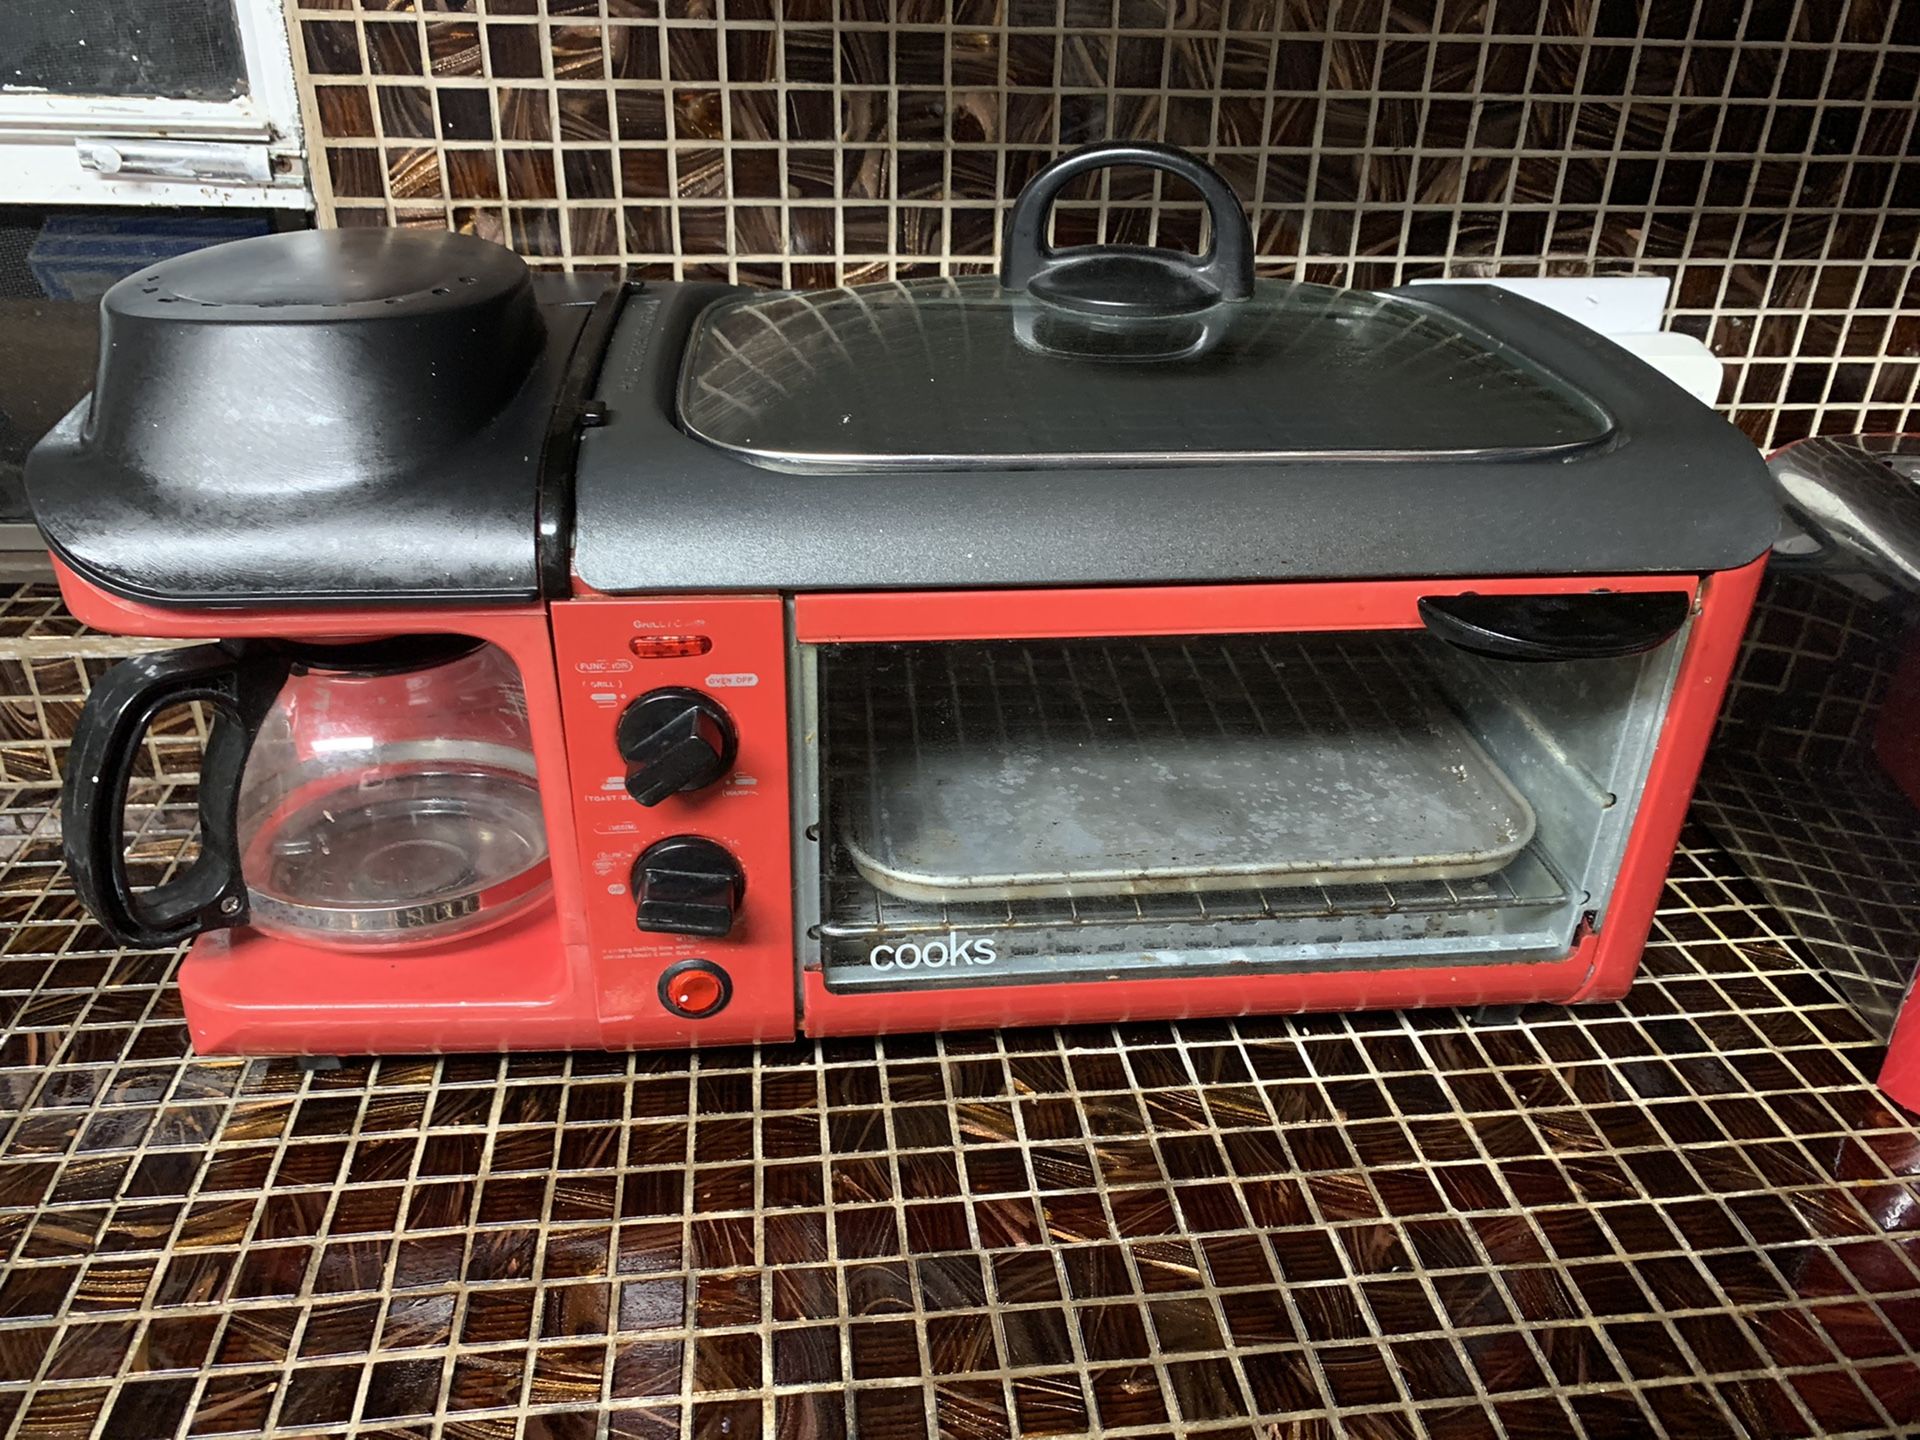 Toaster , Griddle, coffee maker 3 in 1